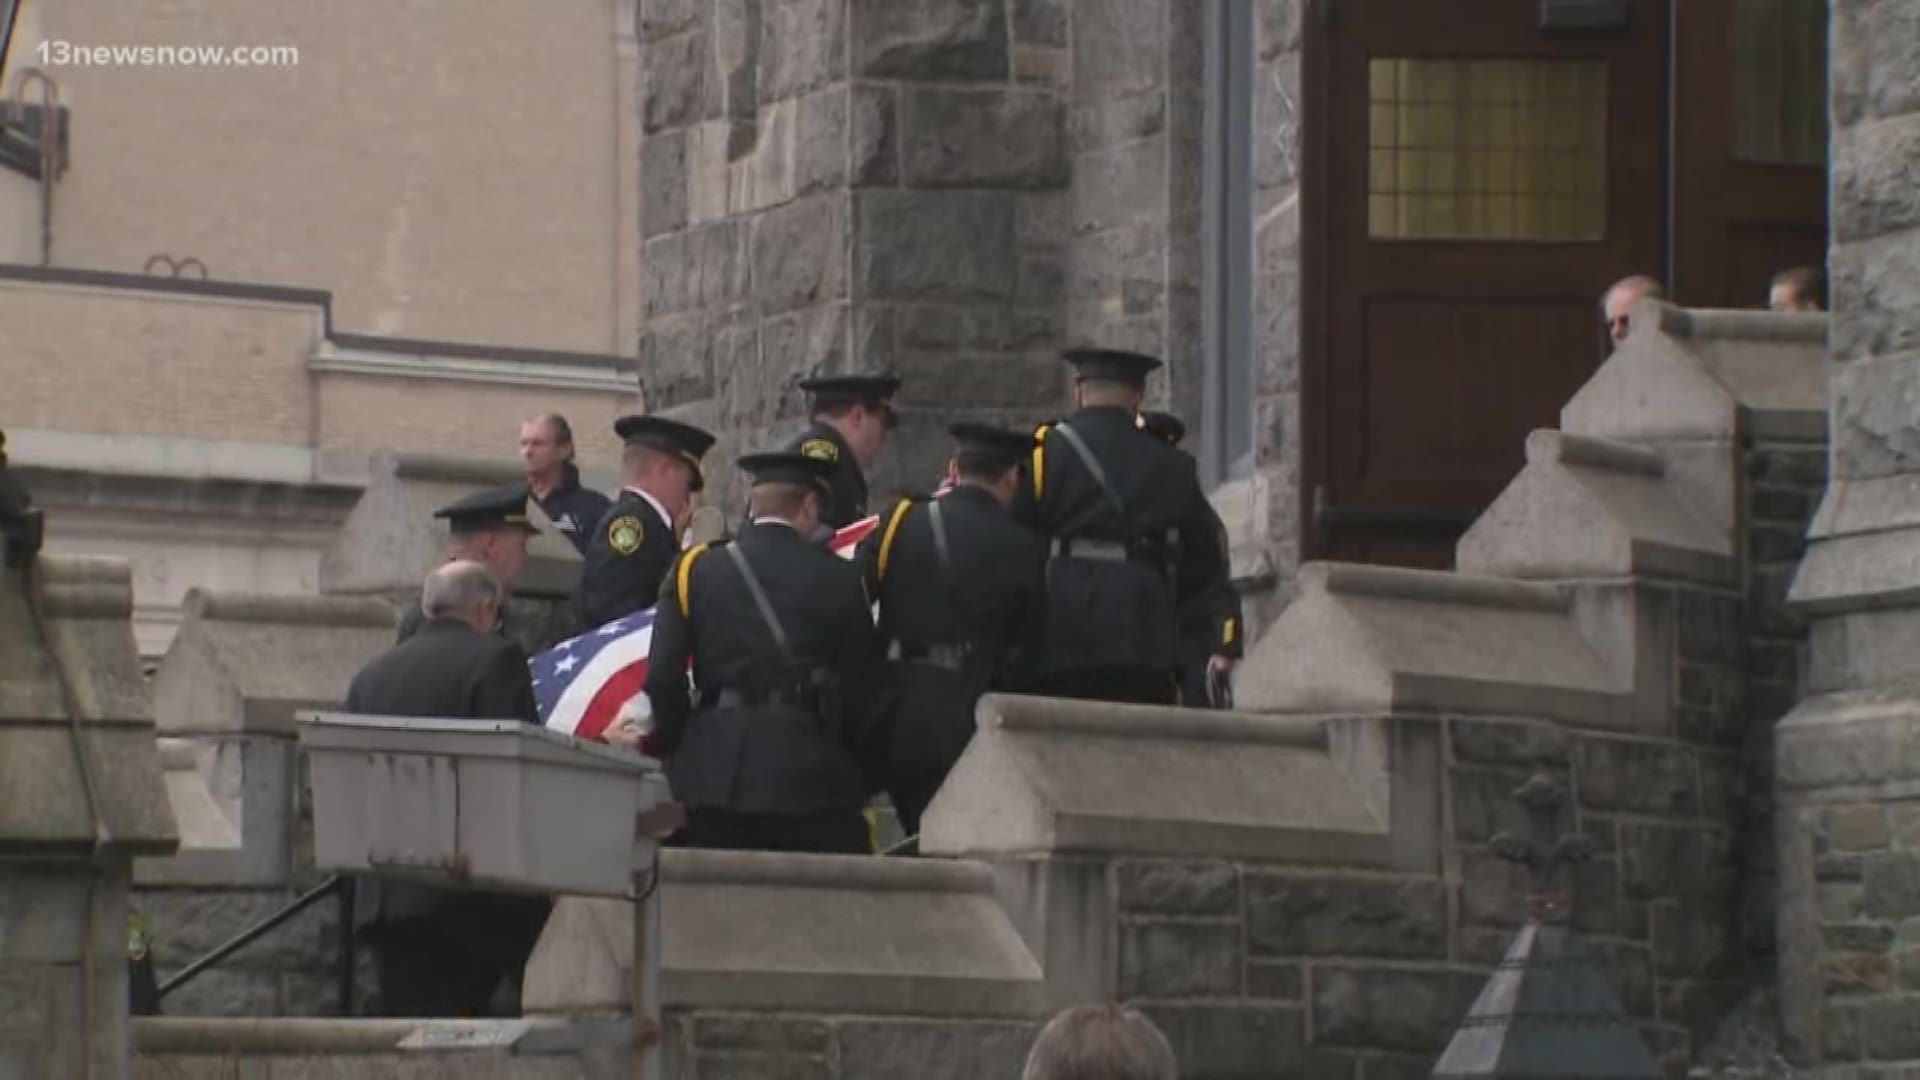 Newport Police Officer Katie Thyne was laid to rest in Lowell, Massachusetts, where she was born. She received a burial with full military and police honors.